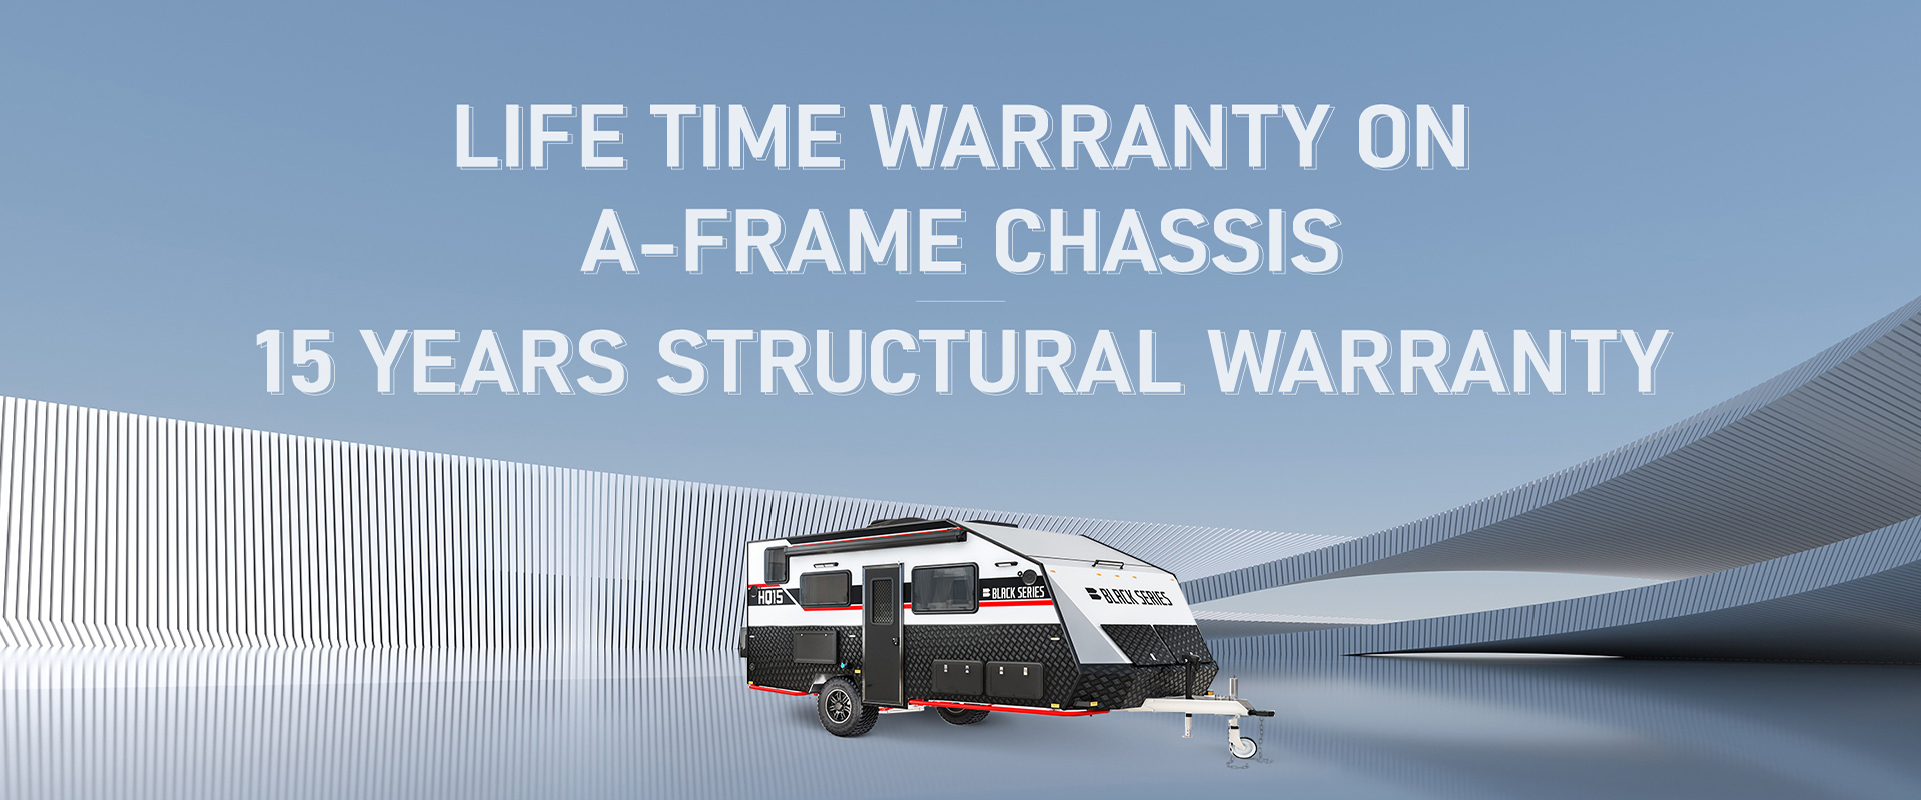 HQ15 comes with life time warranty on a-frame chassis and 15 years structural warranty